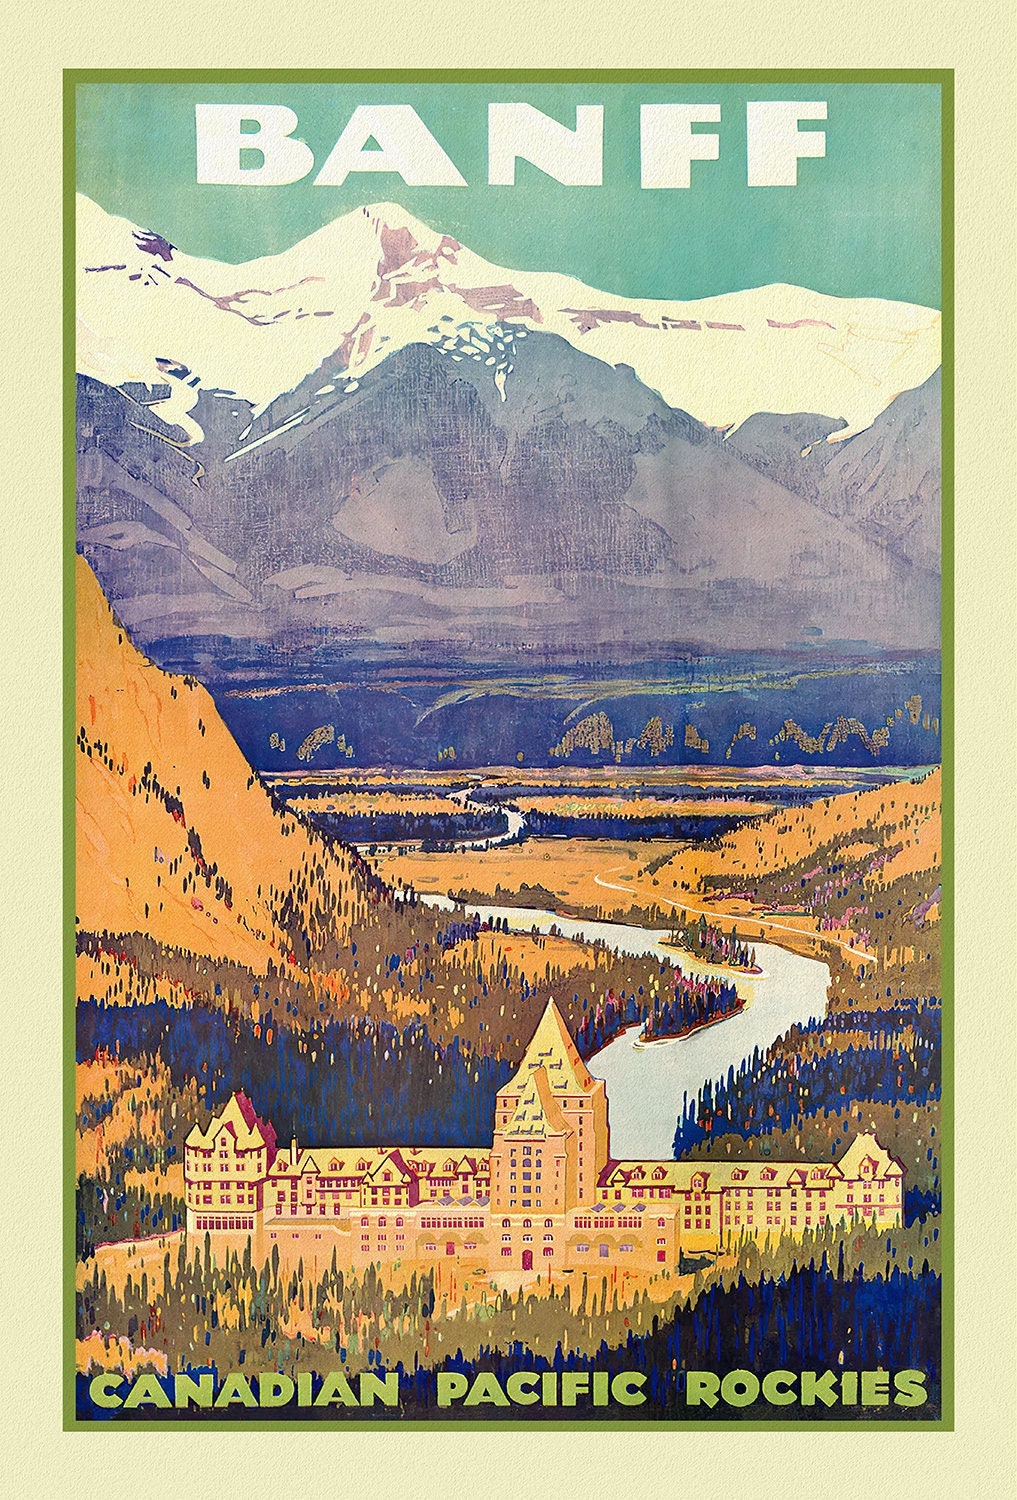 Banff, Rockies, Canadian Pacific , vintage travel poster reprinted on heavy cotton canvas, 50 x 70 cm, 20 x 25" approx.